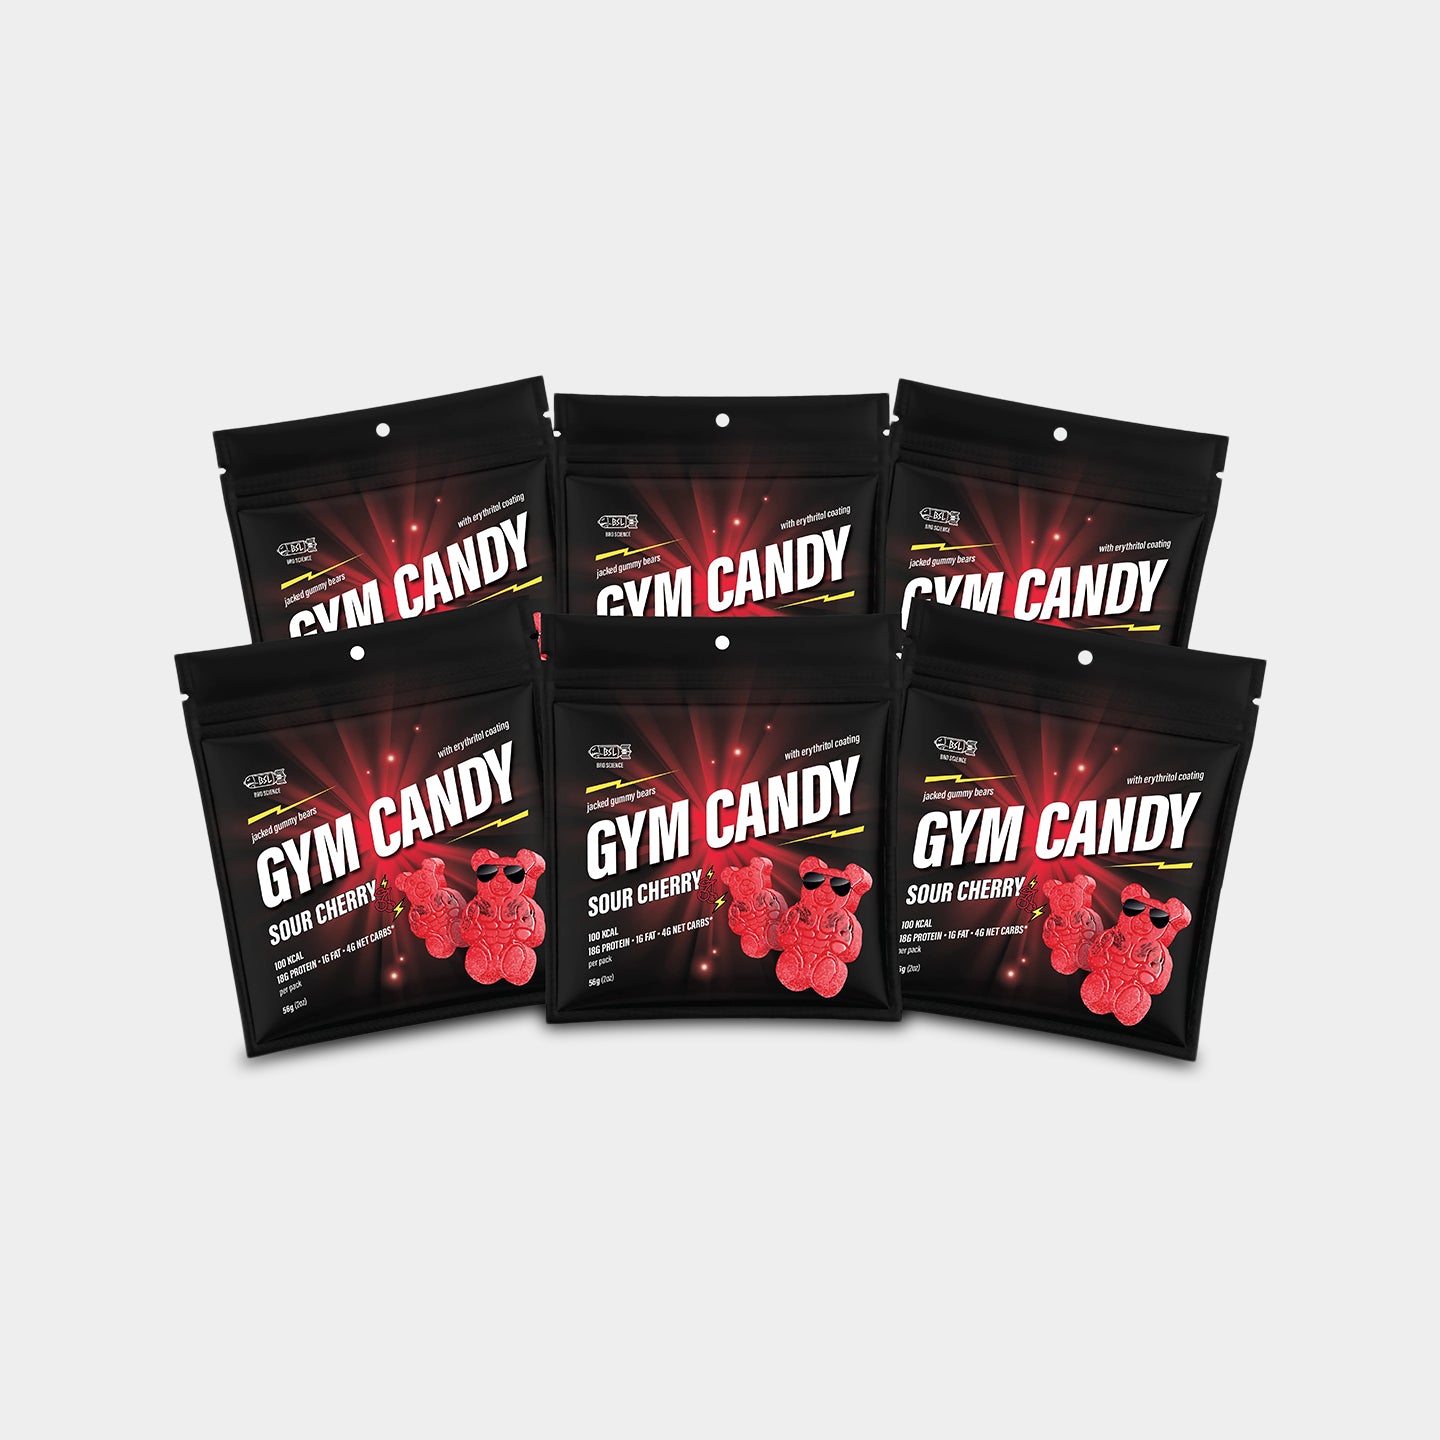 Gym Candy Jacked Gummy Bears, Sour Cherry, 2oz - 6 Pack A1